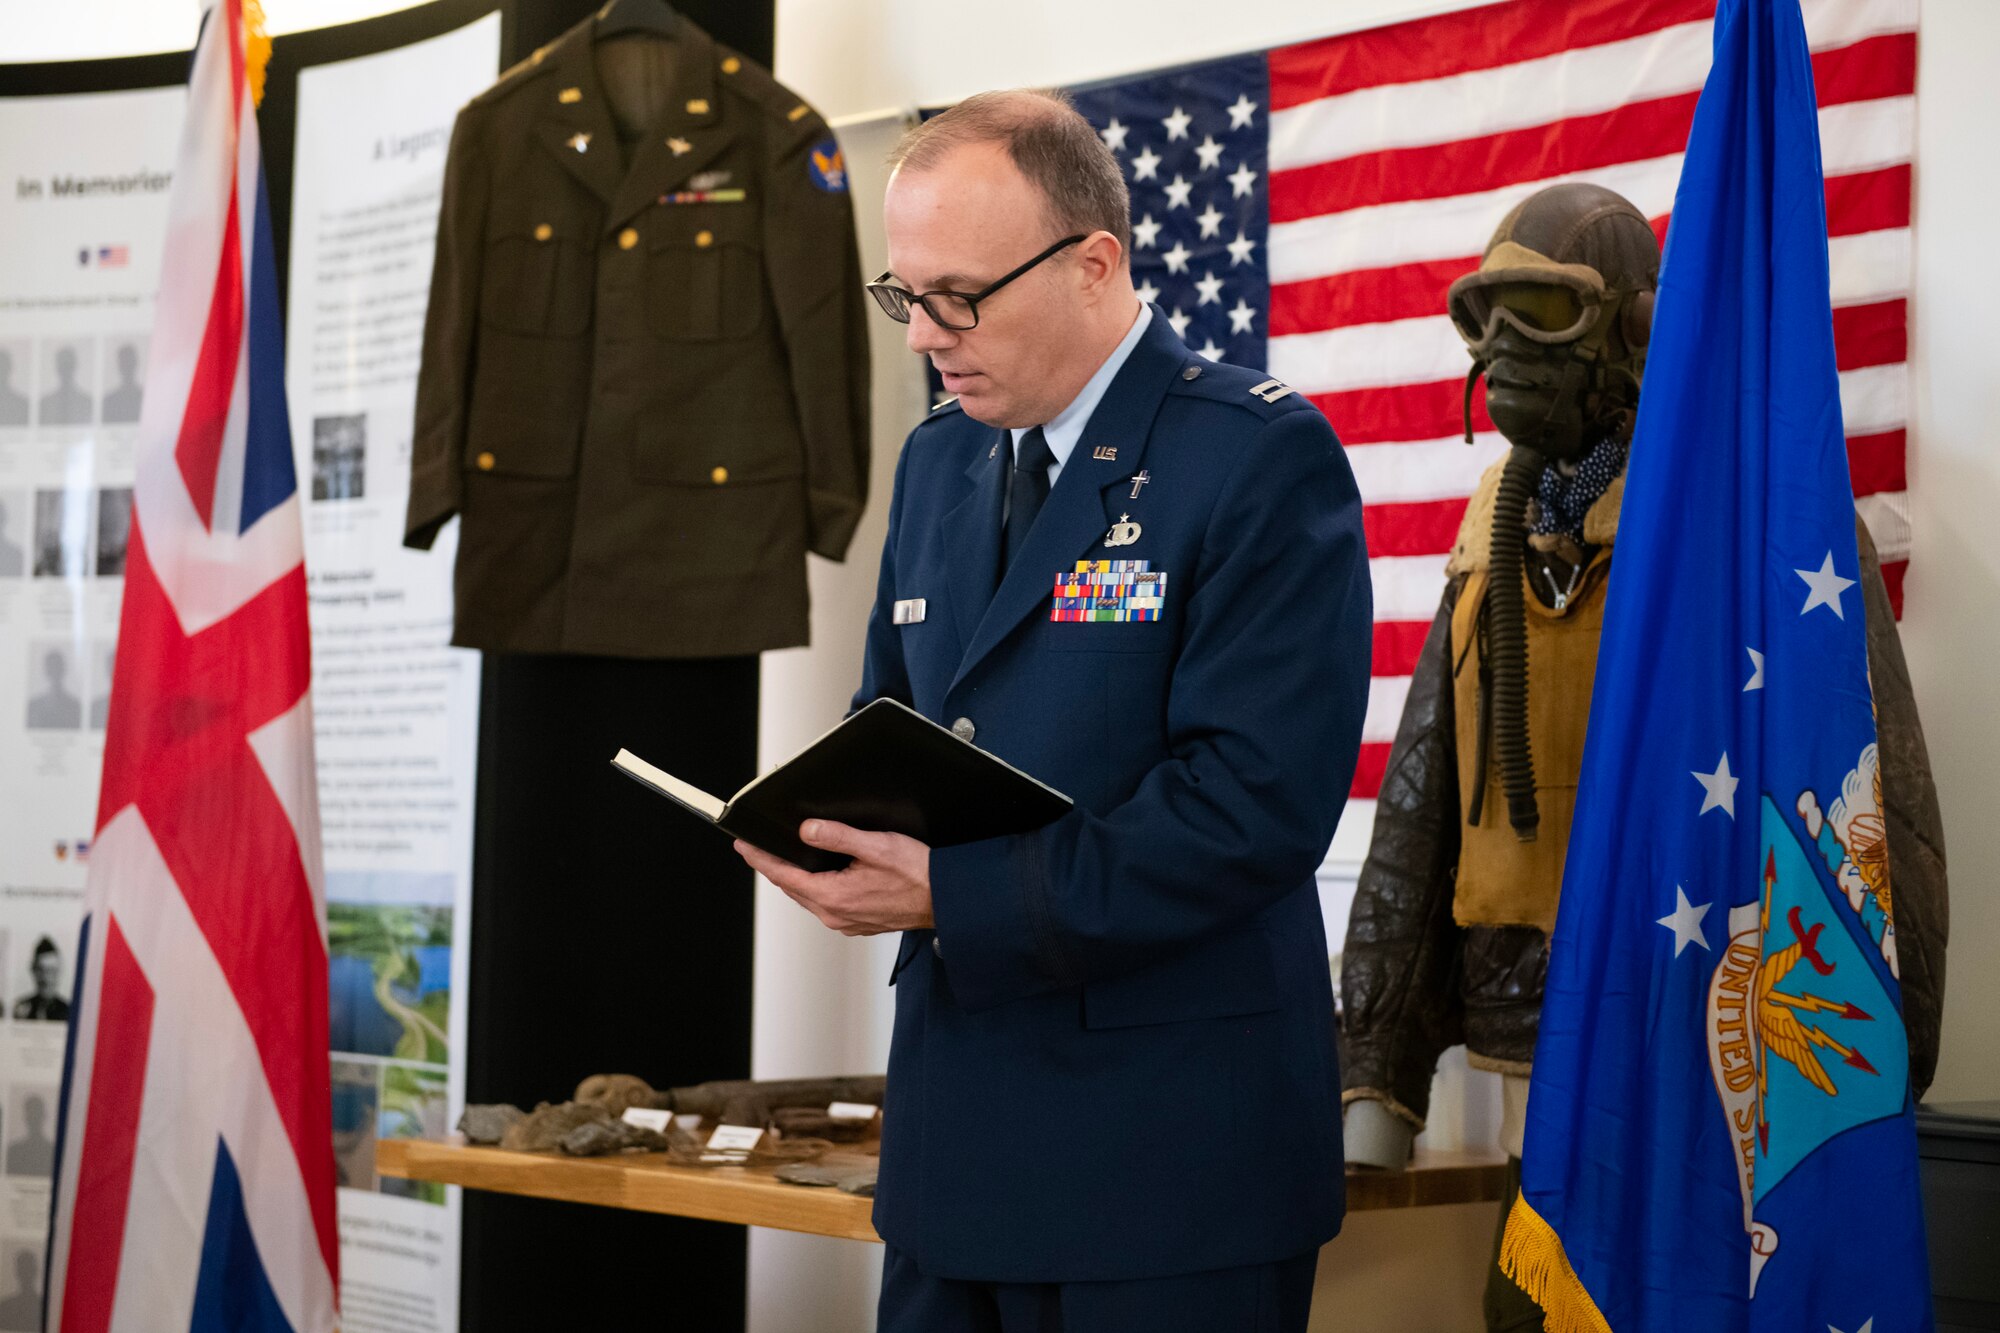 U.S. Air Force Chaplain (Capt) Steven Davis, 501st Combat Support Wing chaplain, delivers an invocation during a Ceremony of Remembrance at Stanwick Lakes, England, Feb. 22, 2024. U.S. and U.K. leaders gathered to honor 17 Airmen who died in a midair collision on Feb. 22, 1944, involving B-17 Flying Fortresses from the 303rd Bombardment Group at RAF Molesworth and the 384th Bombardment Group at RAF Grafton Underwood. The Airmen were part of Operation Argument, or "The Big Week," targeting enemy industrial sites and aircraft facilities in Central Europe to secure Allied air superiority for the upcoming landings in France in June 1944. (U.S. Air Force photo by Staff Sgt. Jennifer Zima)